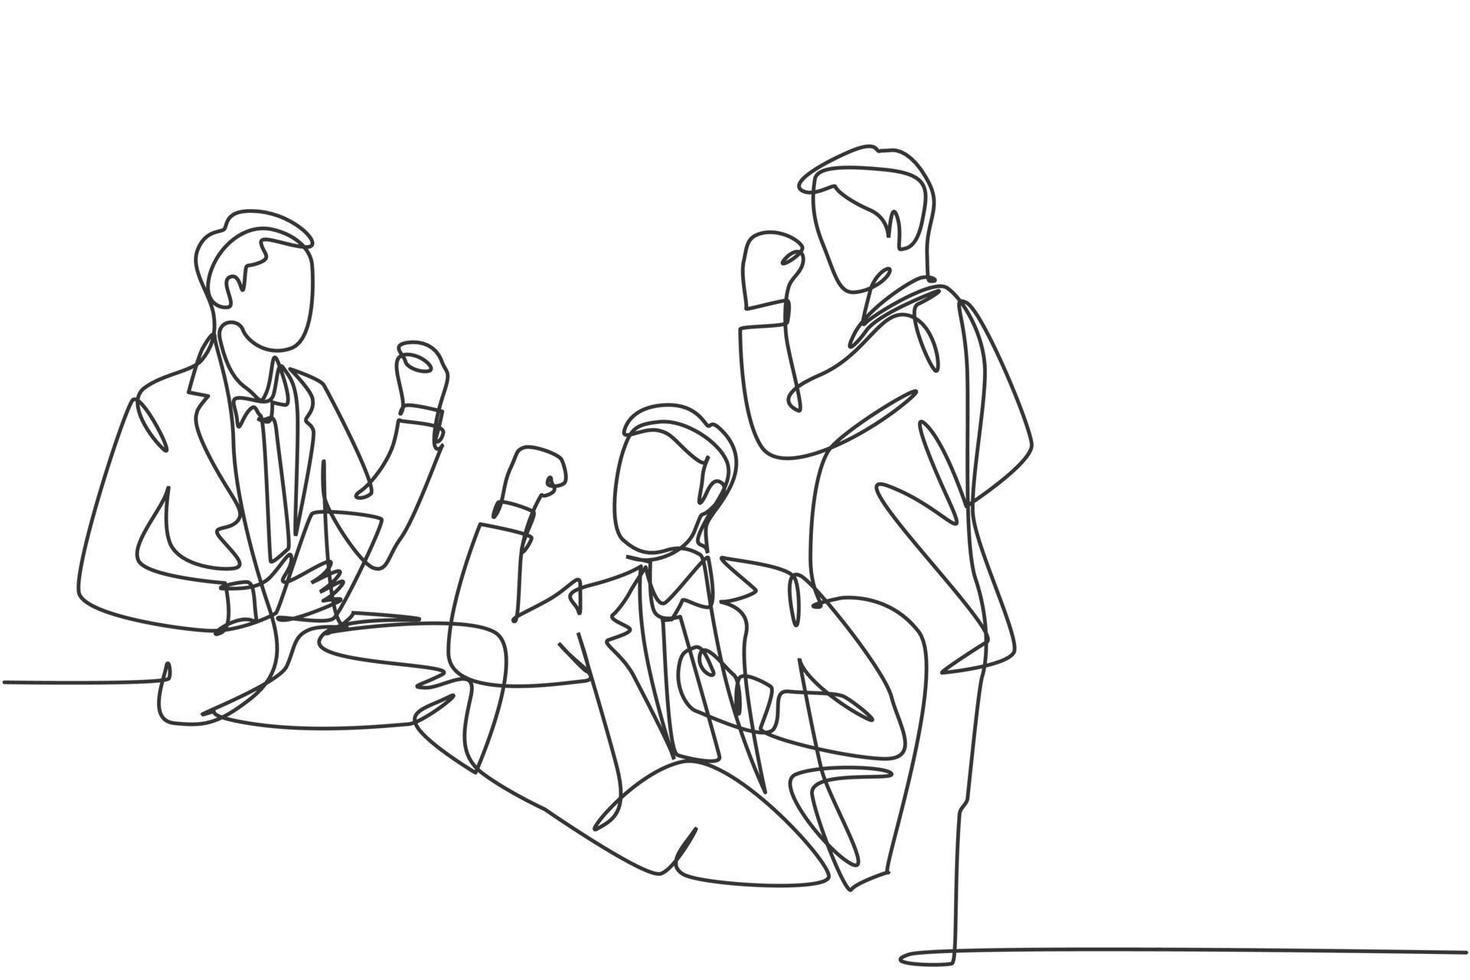 Single continuous line drawing of young happy businessmen celebrating their success in getting investment together. Business teamwork celebration concept one line draw design vector illustration